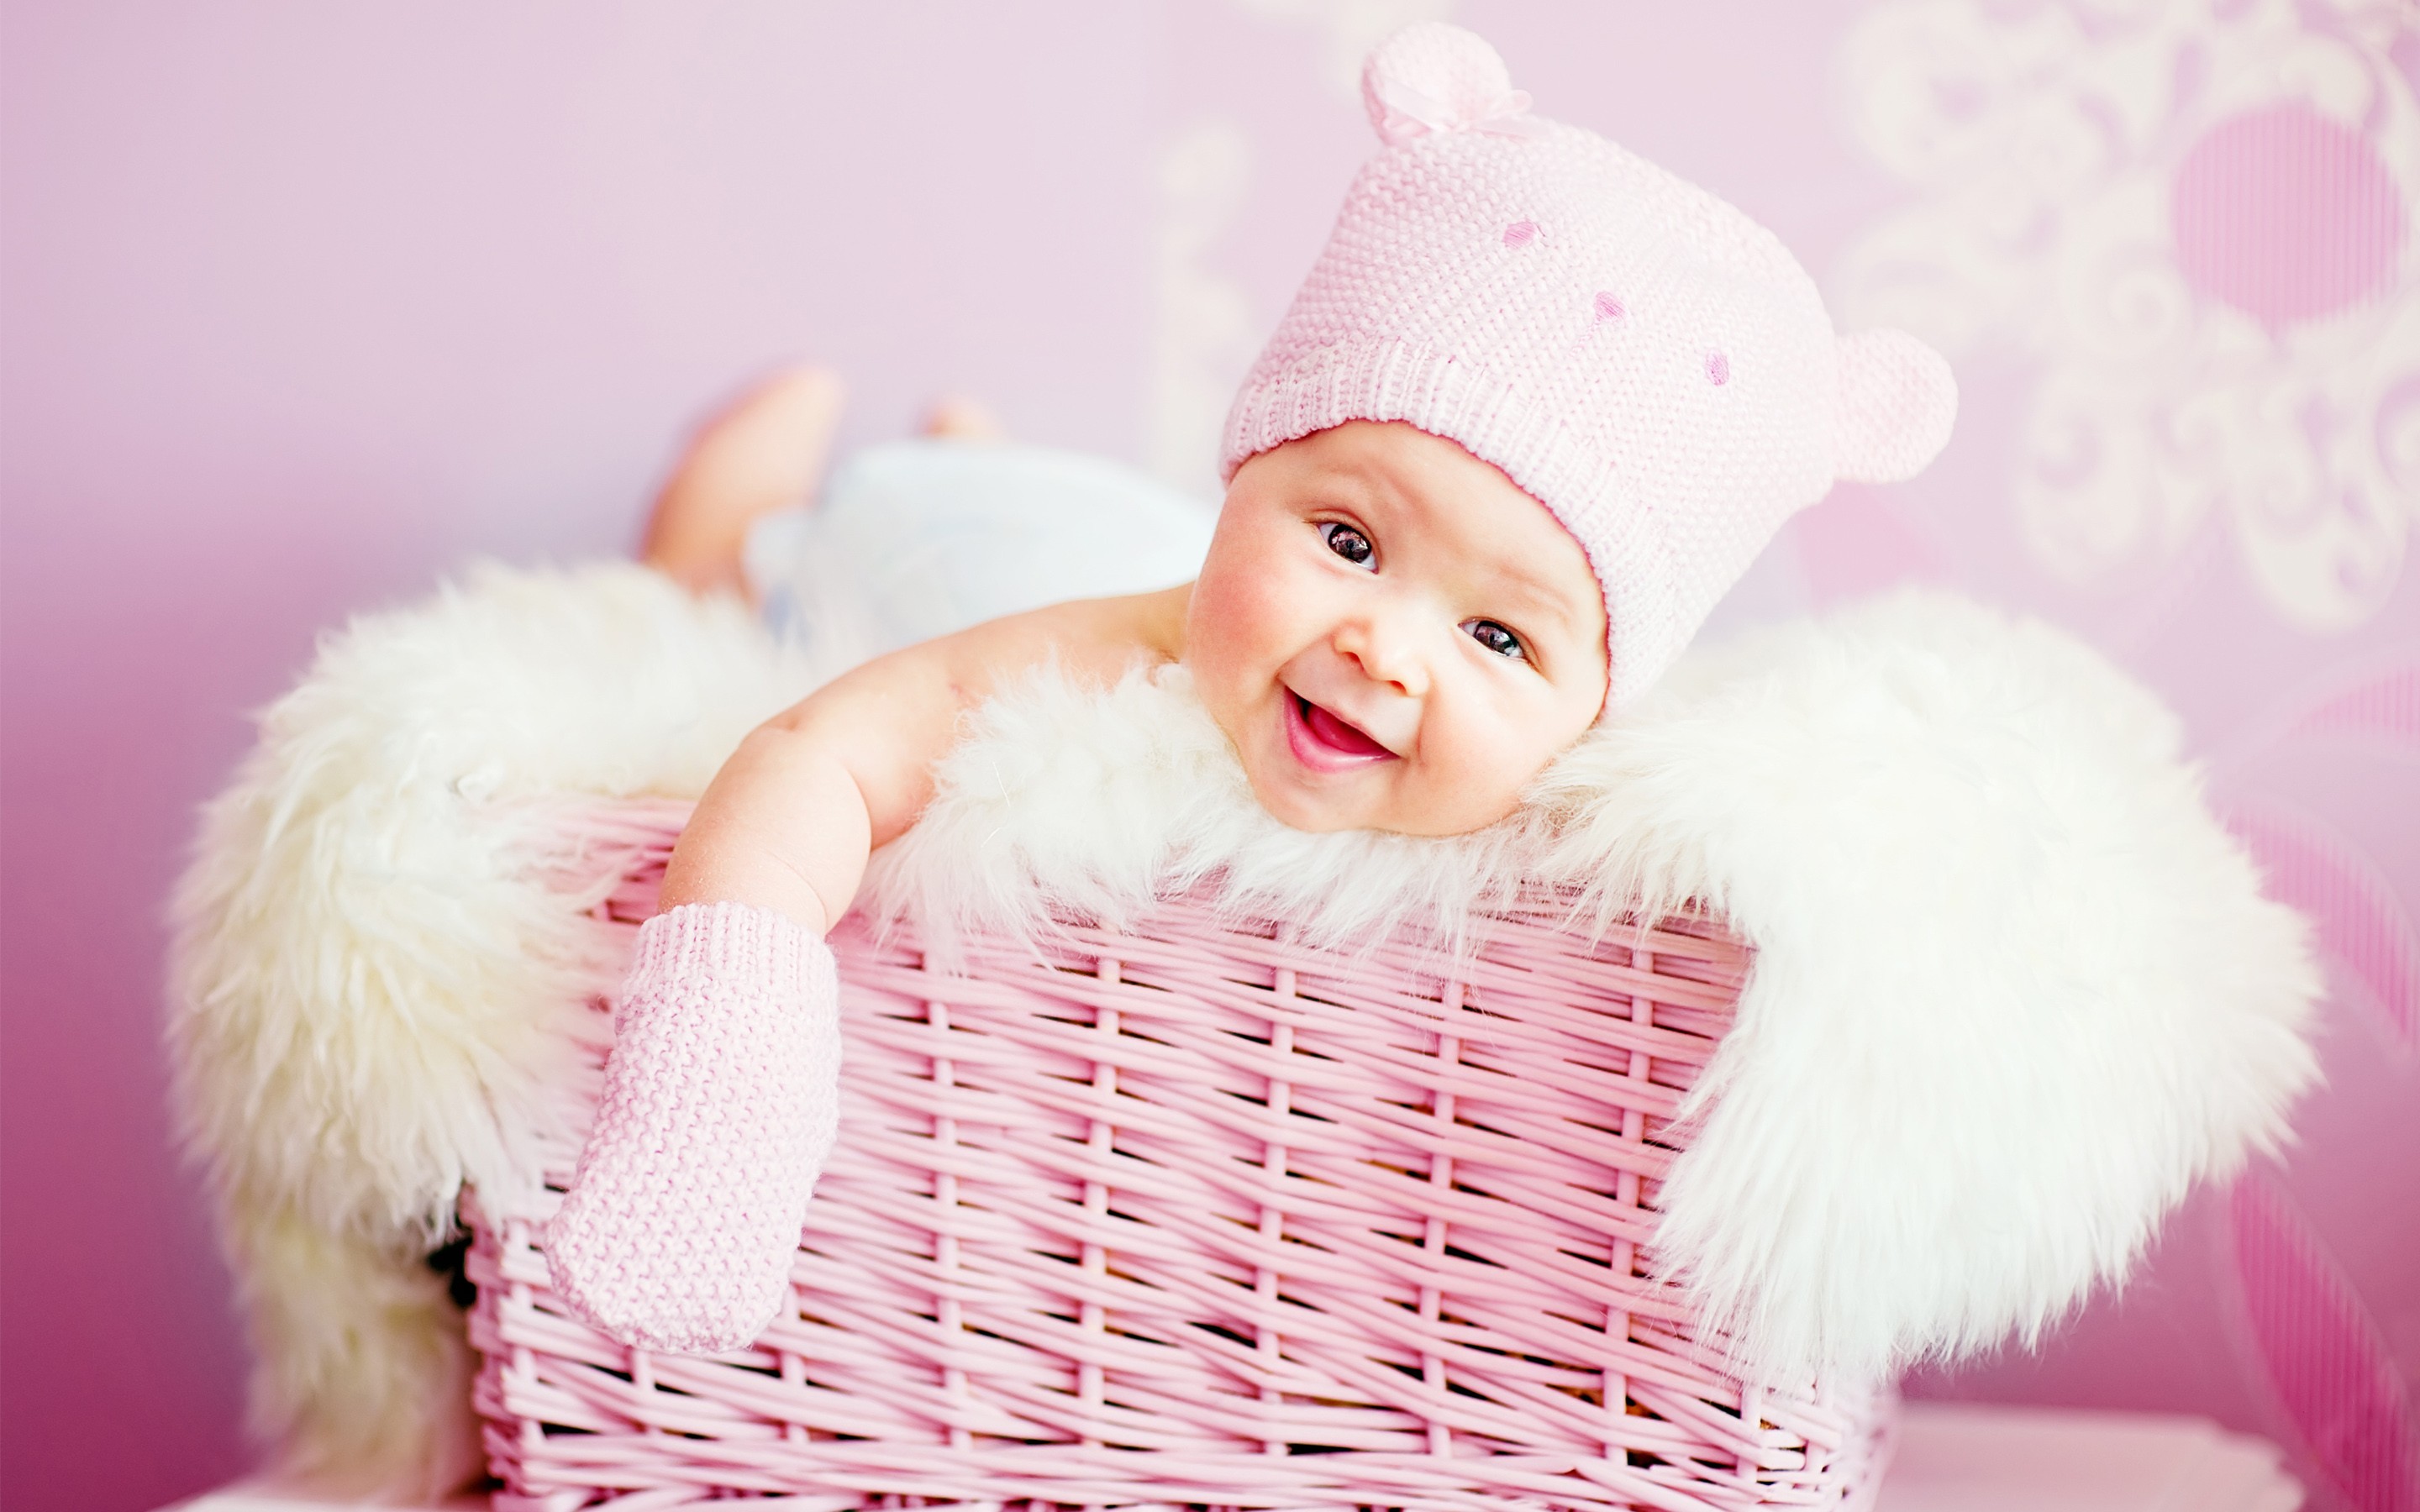 Baby Laughing Cute - Babies Laughing , HD Wallpaper & Backgrounds